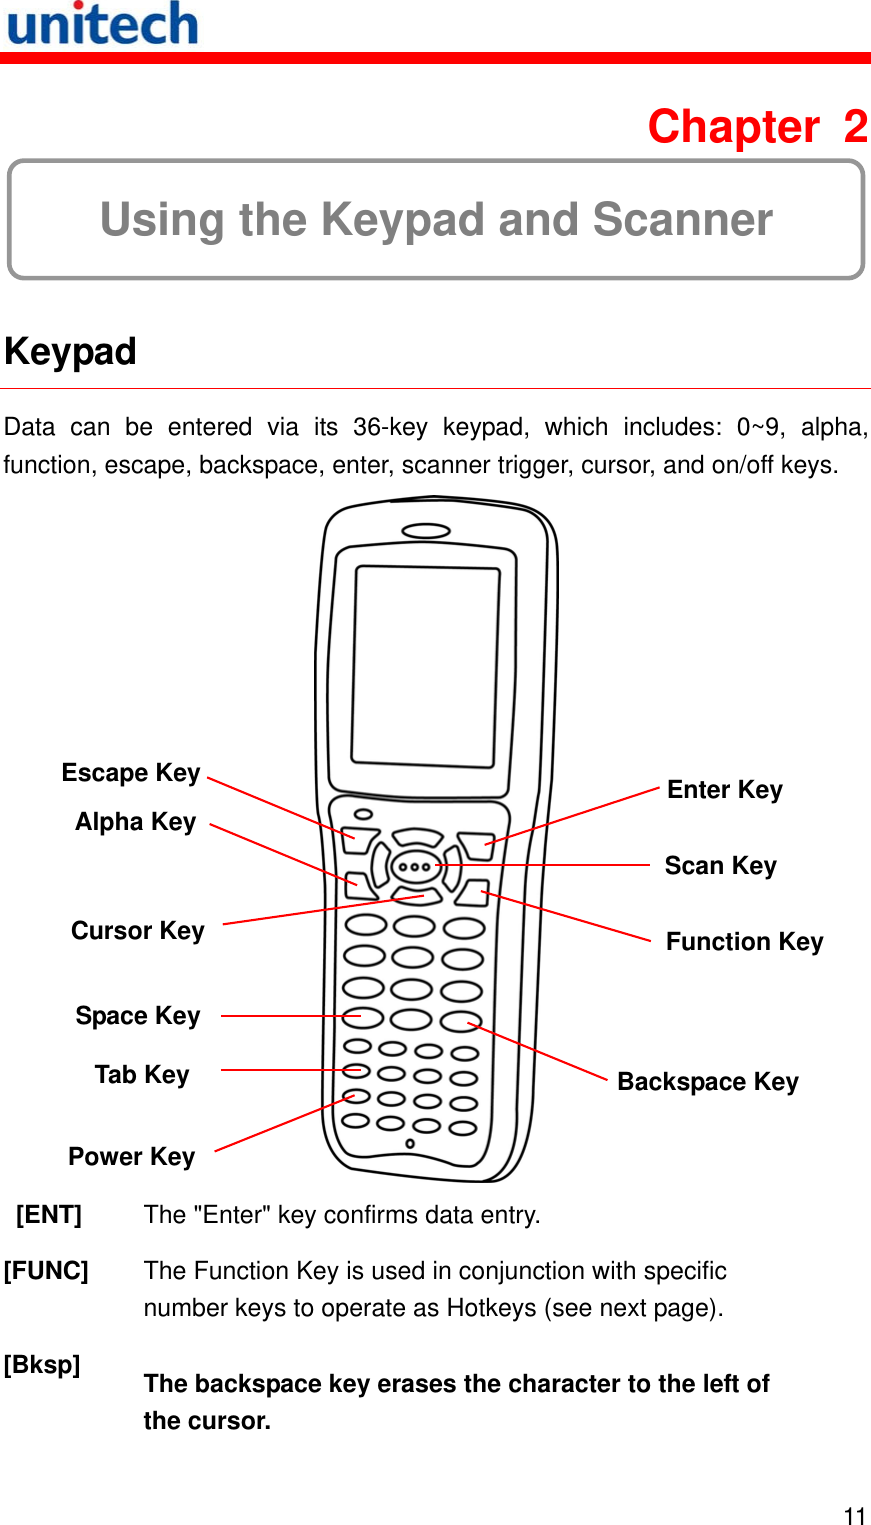   11 Chapter 2  Using the Keypad and Scanner  Keypad Data can be entered via its 36-key keypad, which includes: 0~9, alpha, function, escape, backspace, enter, scanner trigger, cursor, and on/off keys.    Escape Key Enter Key Alpha KeyScan Key Cursor Key  Function Key Space Key Tab Key  Backspace Key   Power Key [ENT]  The &quot;Enter&quot; key confirms data entry. [FUNC]  The Function Key is used in conjunction with specific number keys to operate as Hotkeys (see next page). [Bksp]  The backspace key erases the character to the left of the cursor. 